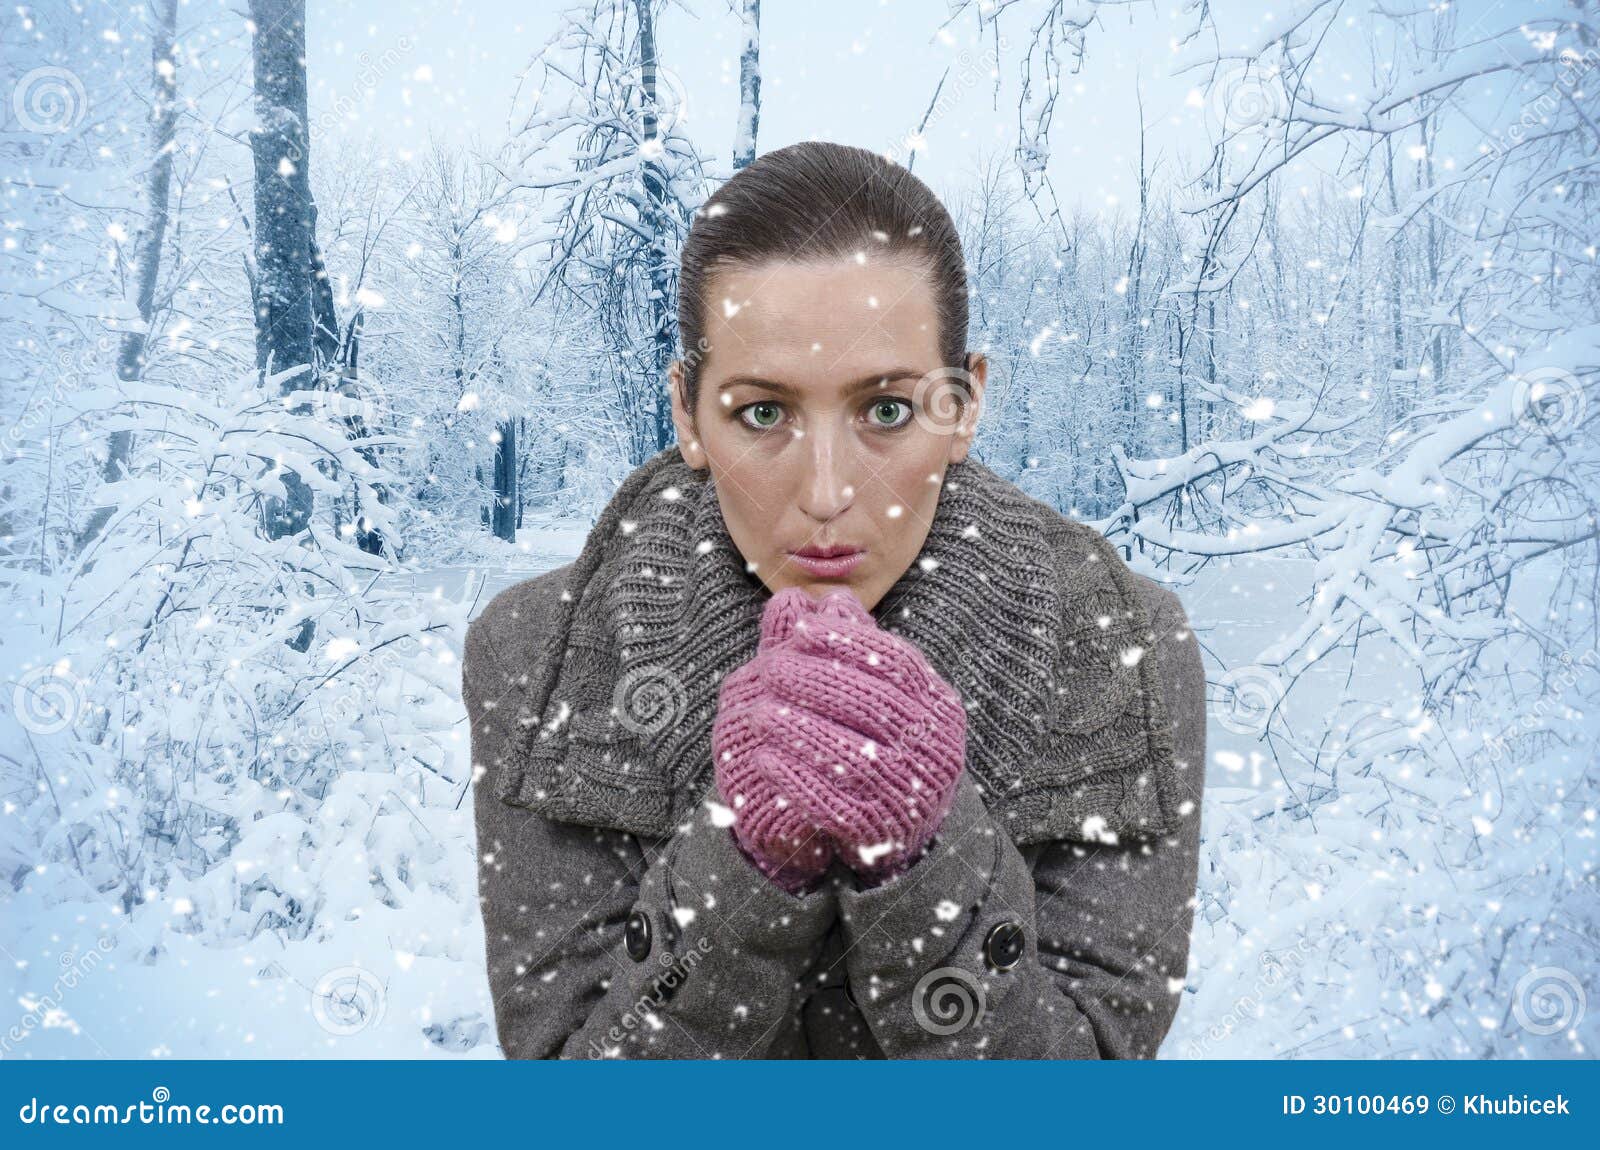 Snow stock image. Image of give, female, celebrate, attractive - 30100469